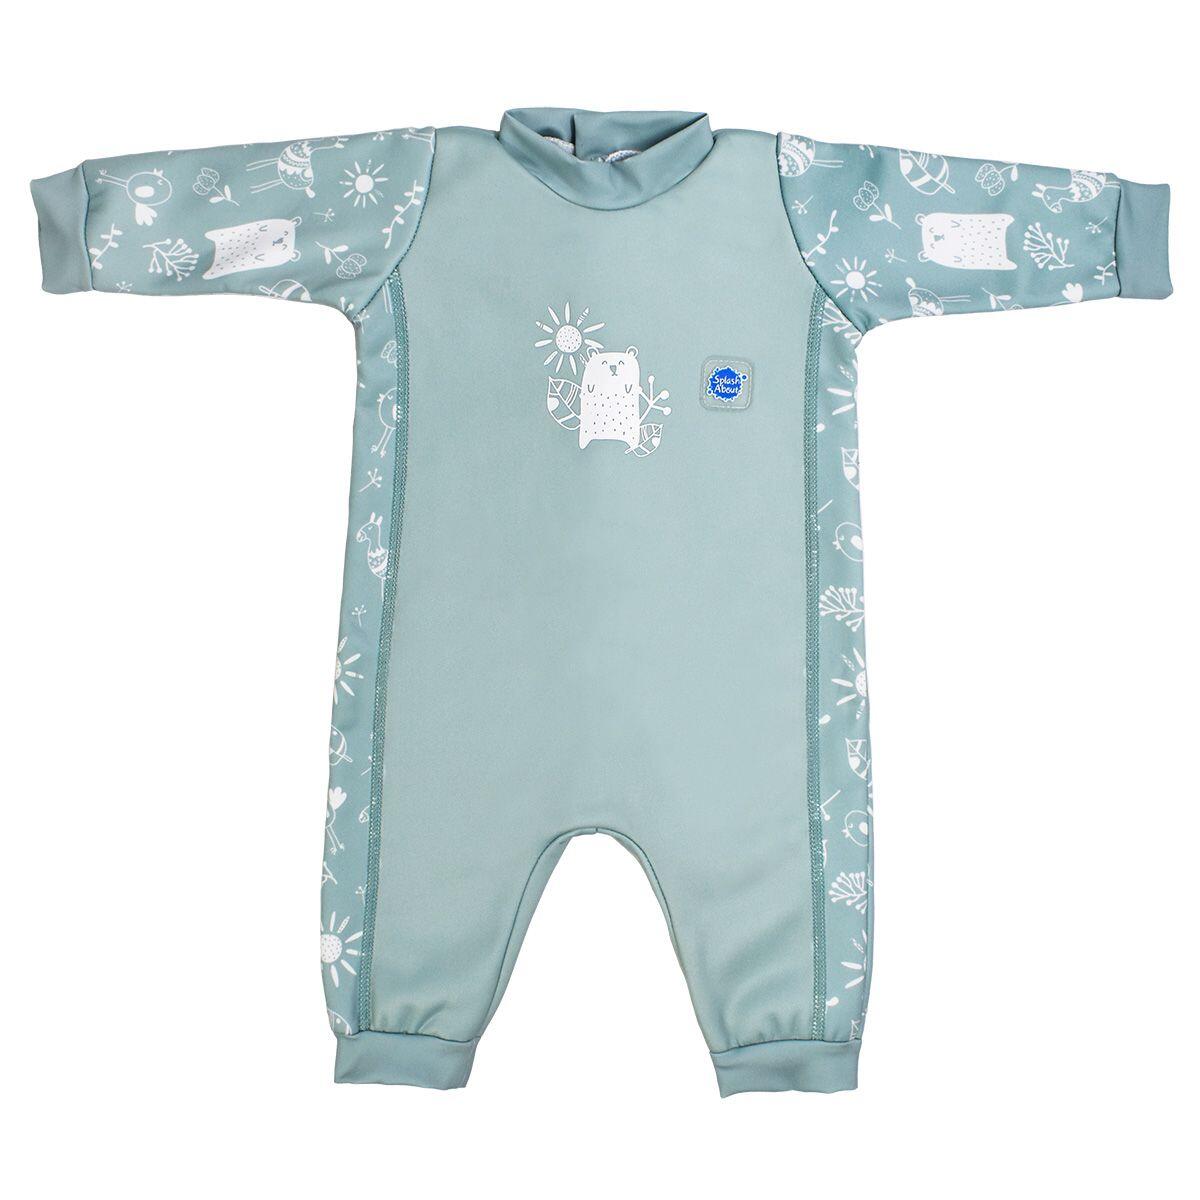 SPLASH ABOUT Splash About Warm in One Baby Wetsuit, Sunny Bear